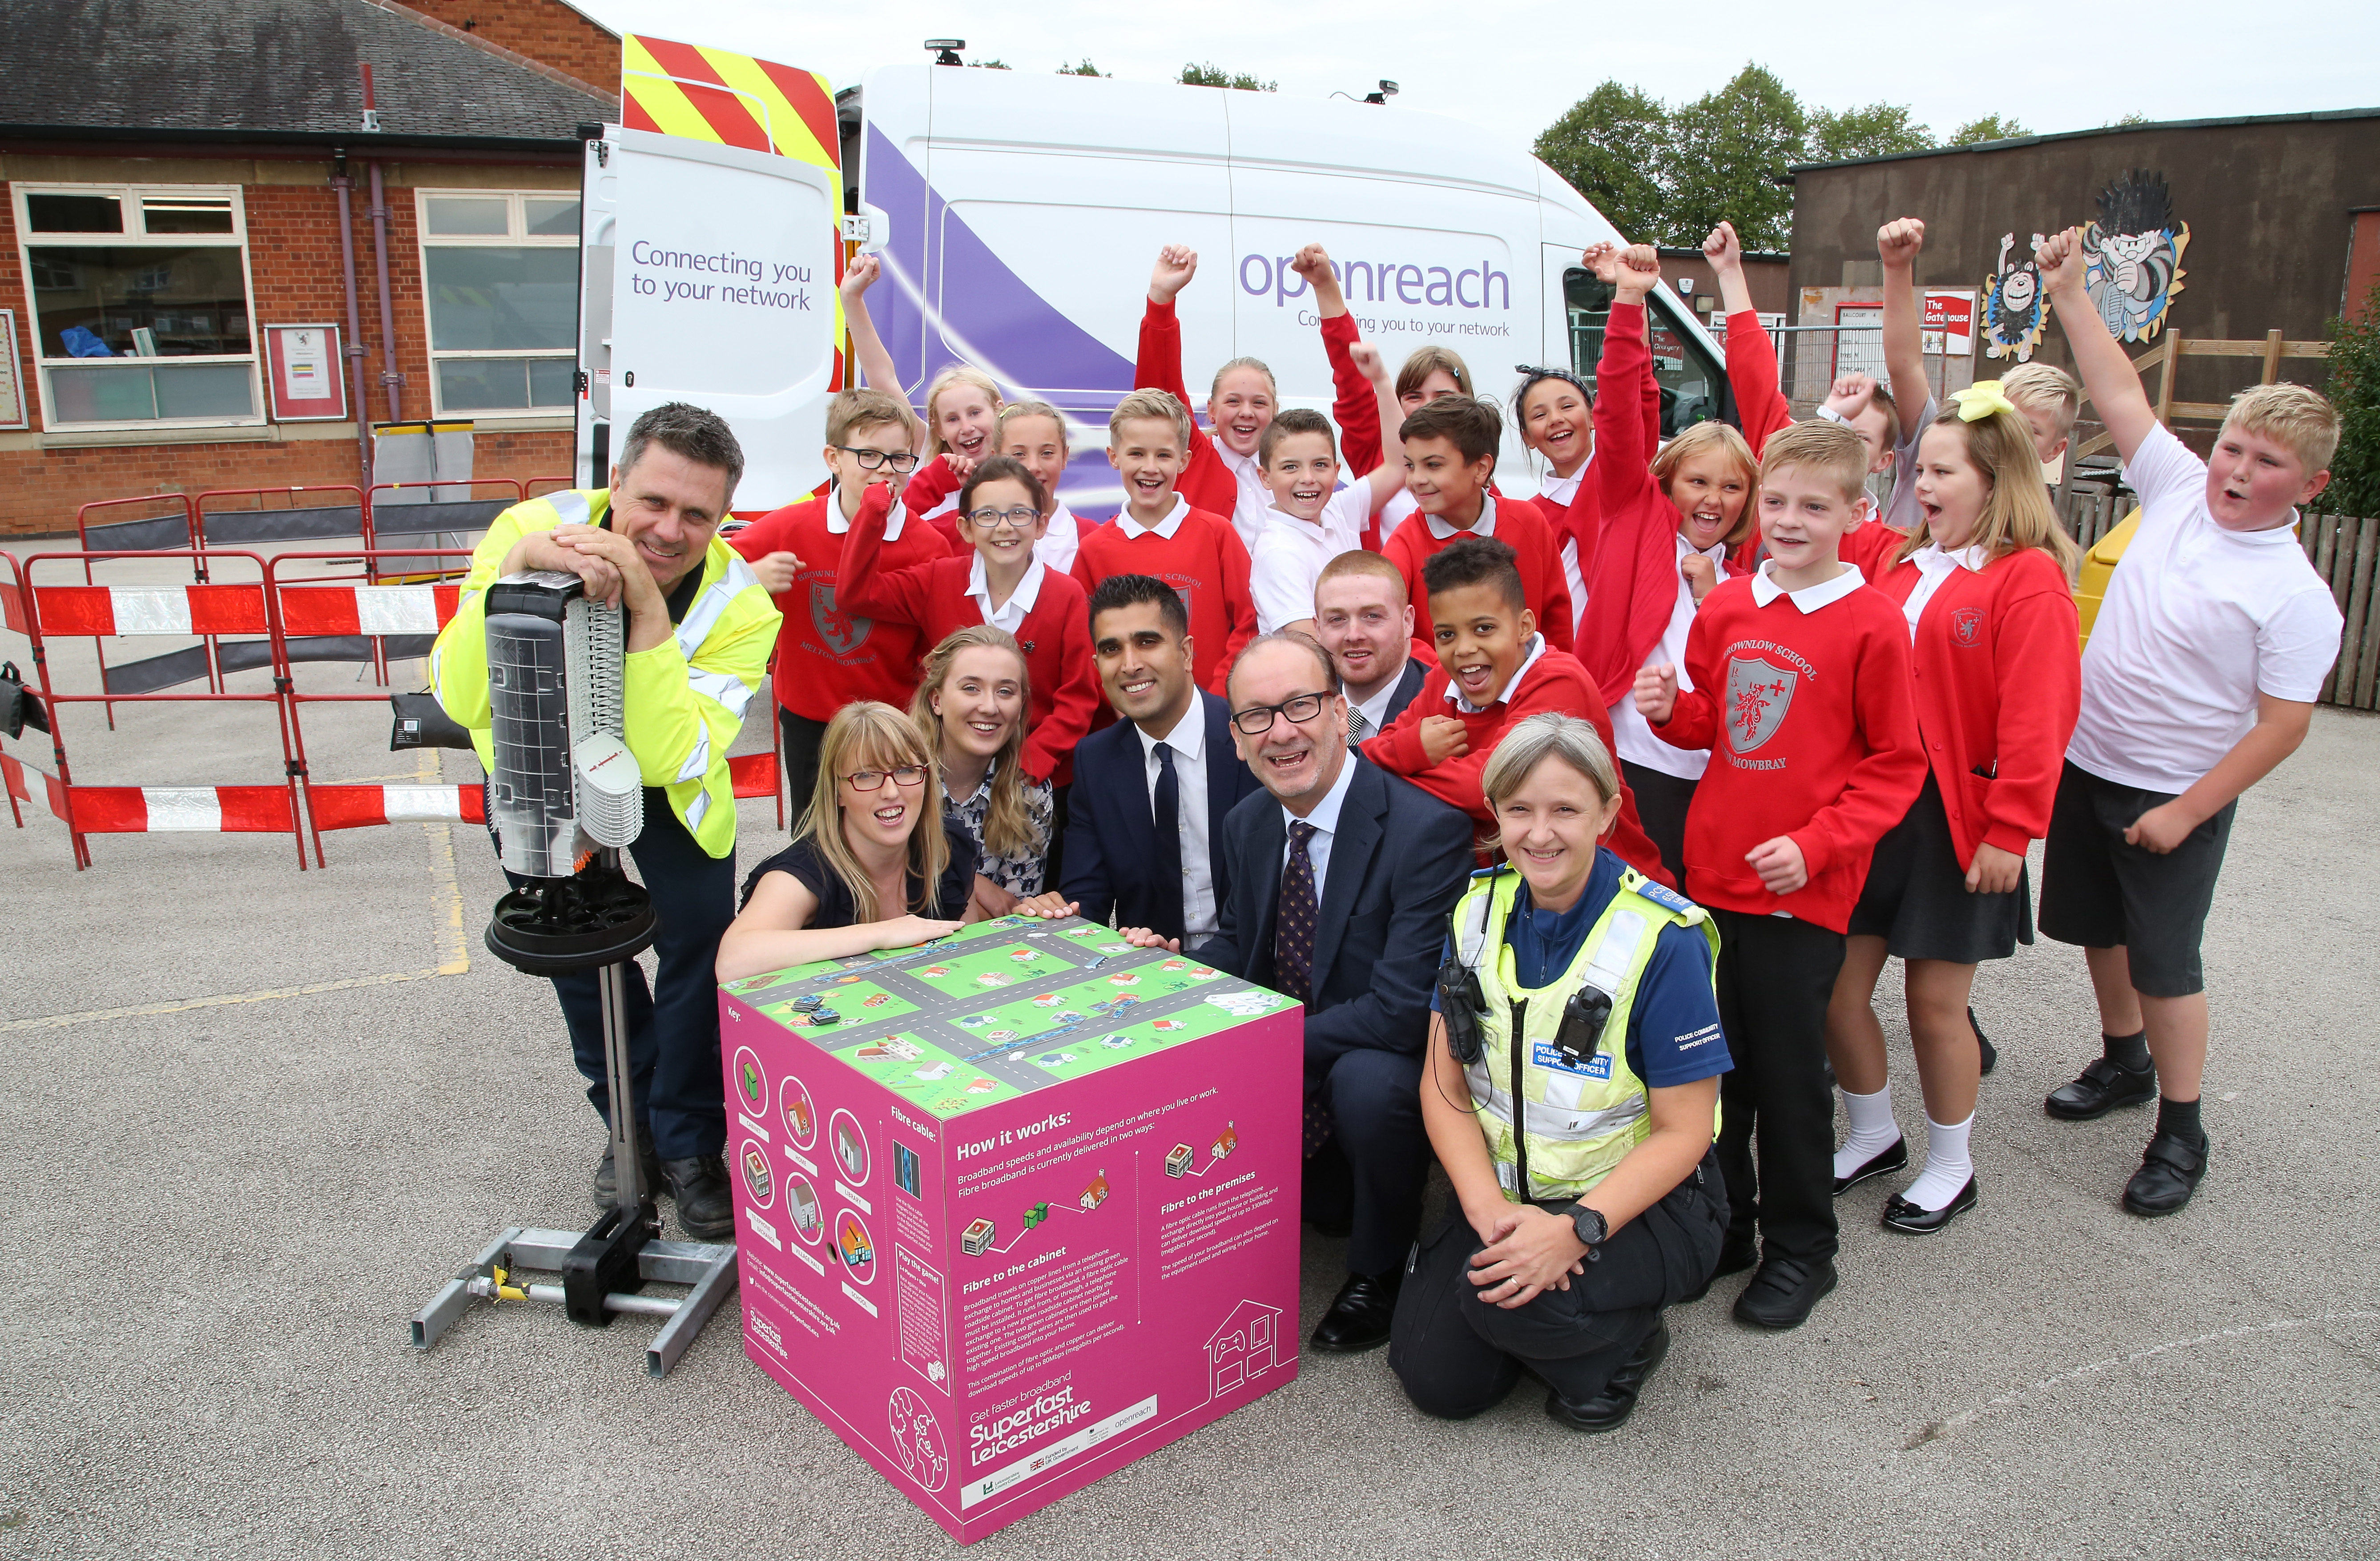 Brownlow Primary School children with representatives from Openreach, BT, Leicestershire Police and Leicestershire County Council all stood around broadband cube board game with Openreach van in background